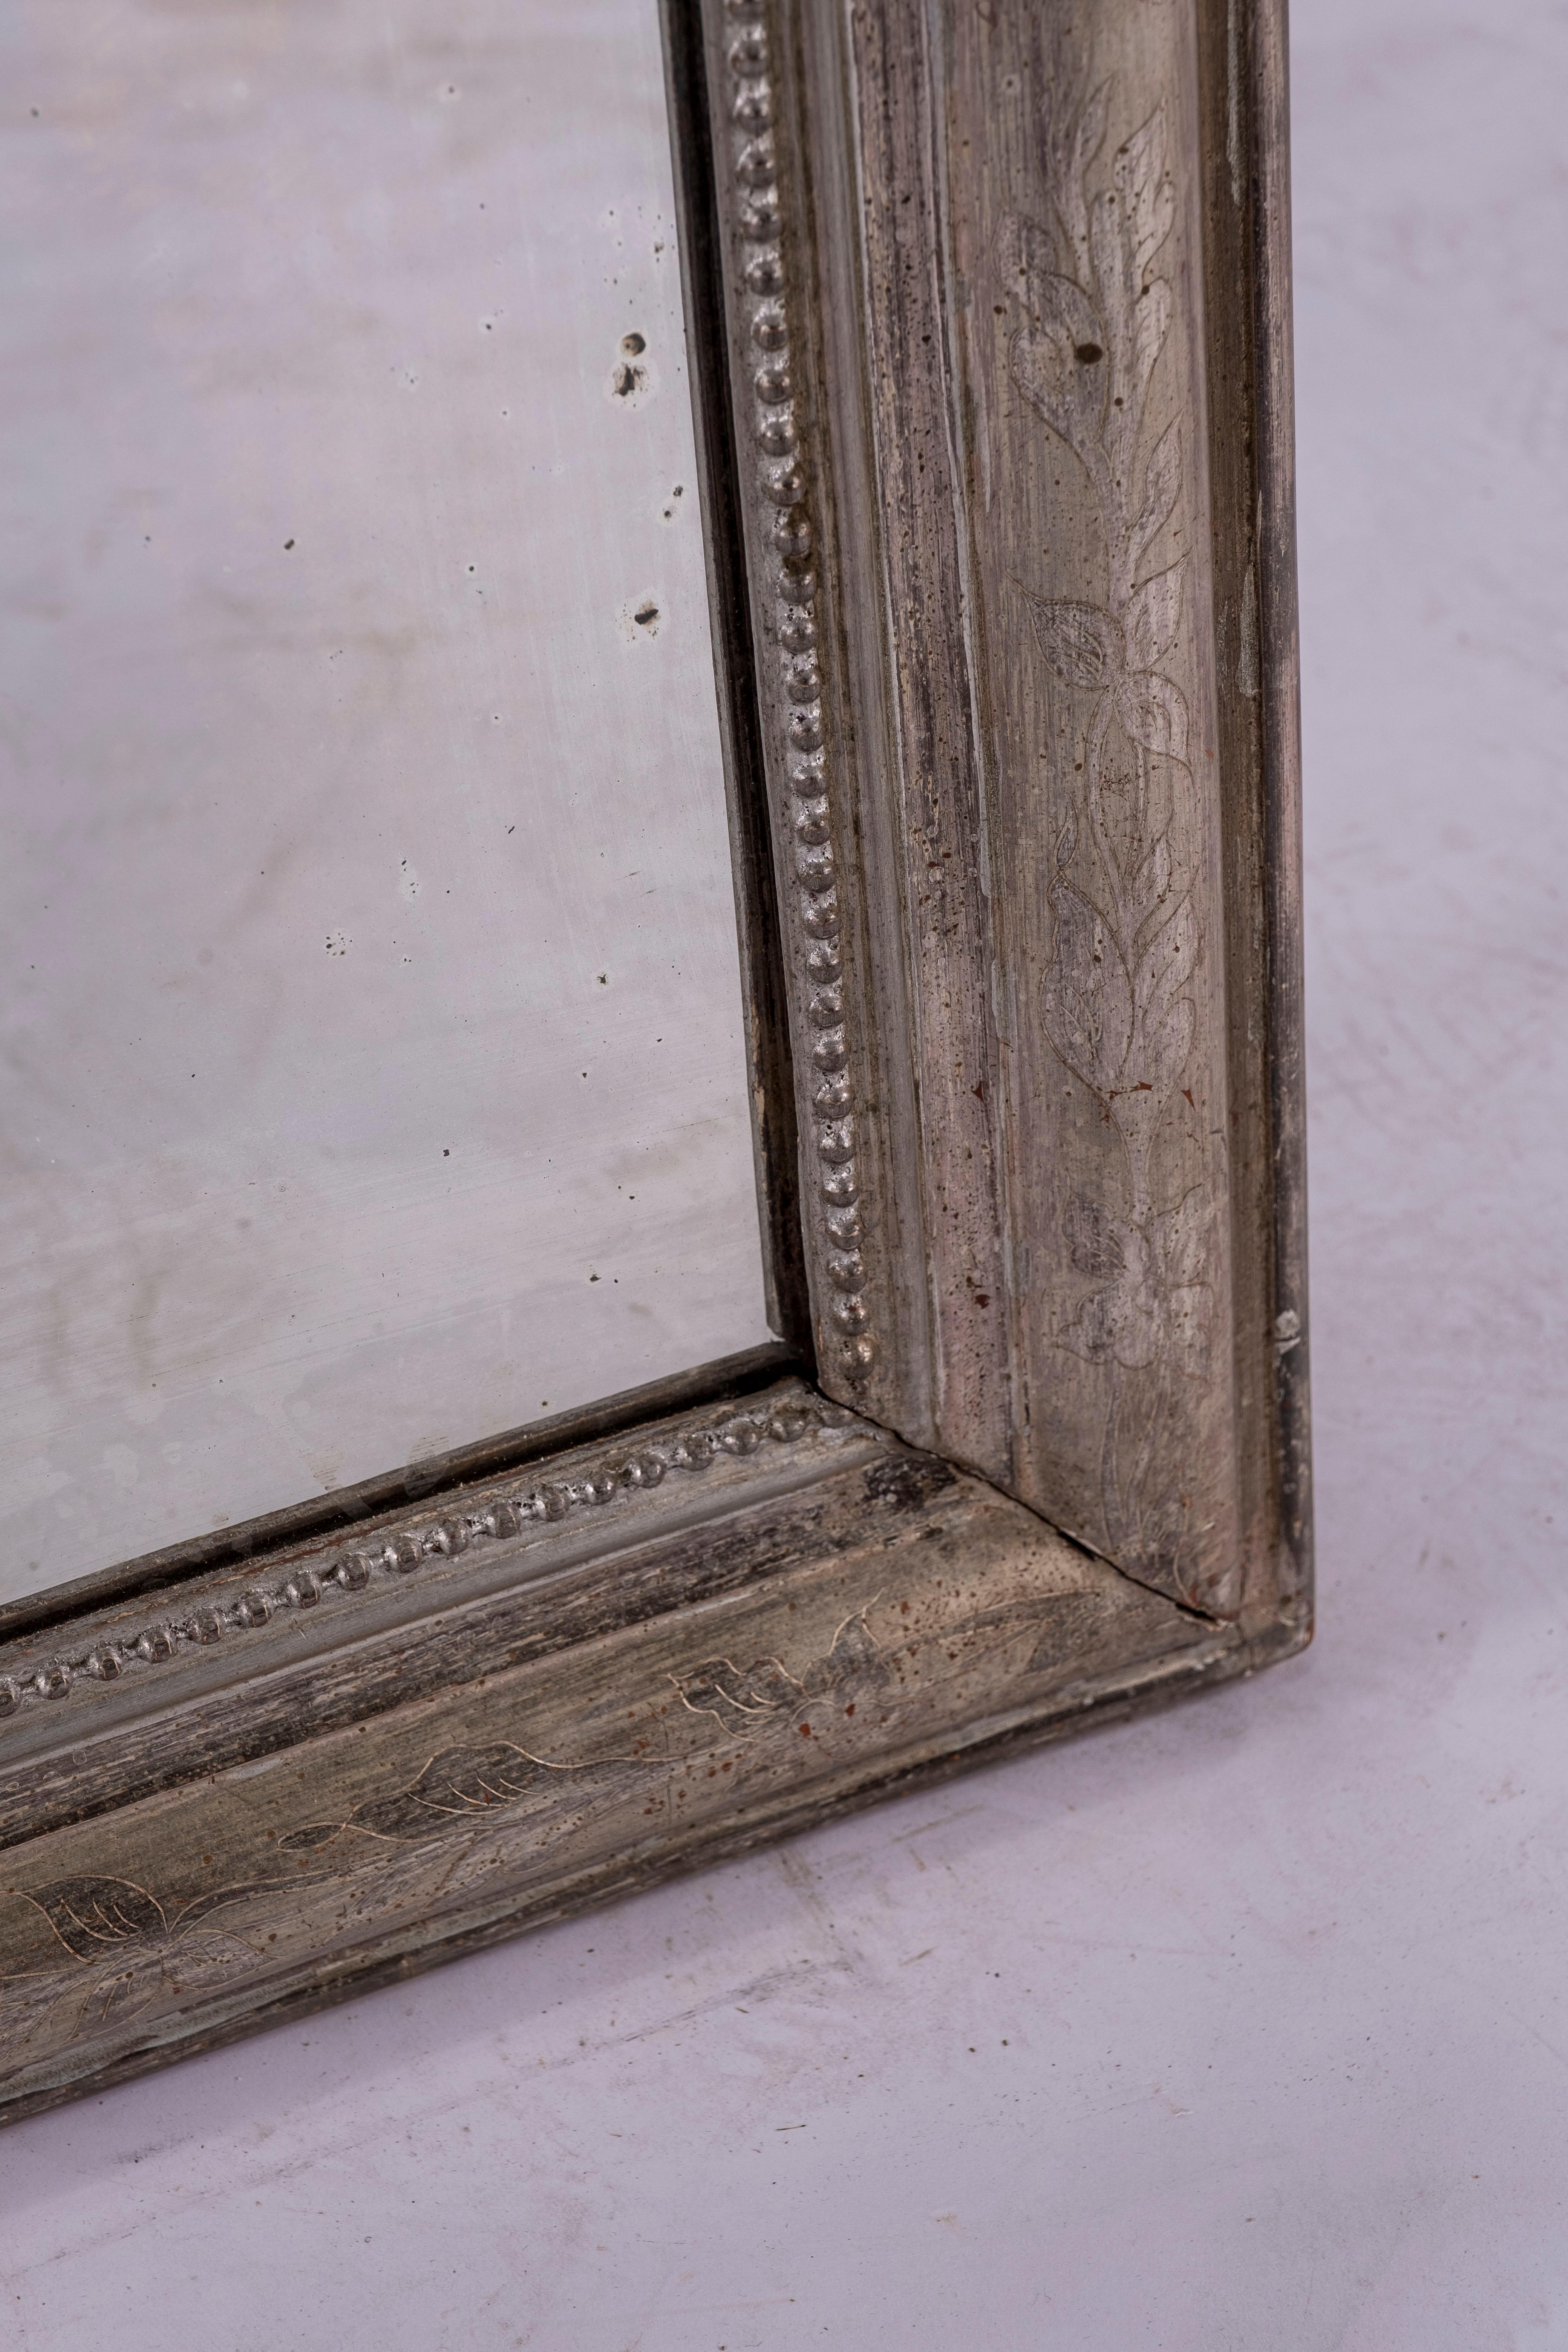 19th century silver Louis Philippe mirror with floral etching on wooden perimeter.